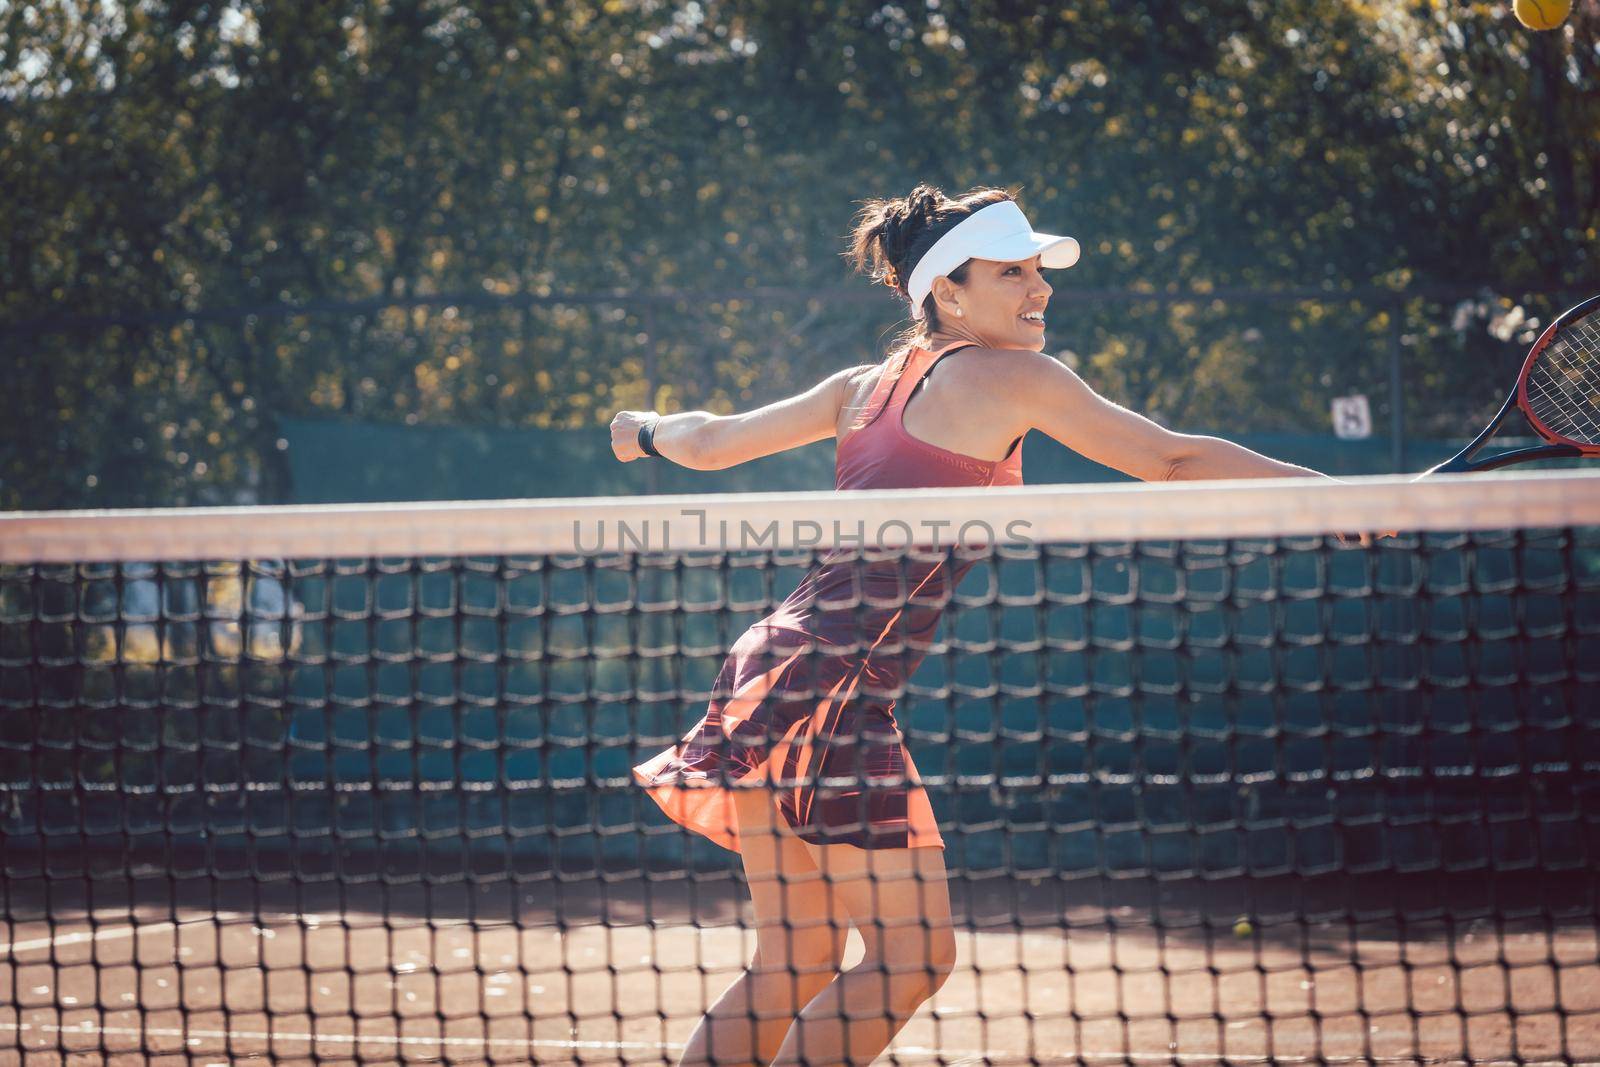 Woman in red sport dress playing tennis by Kzenon